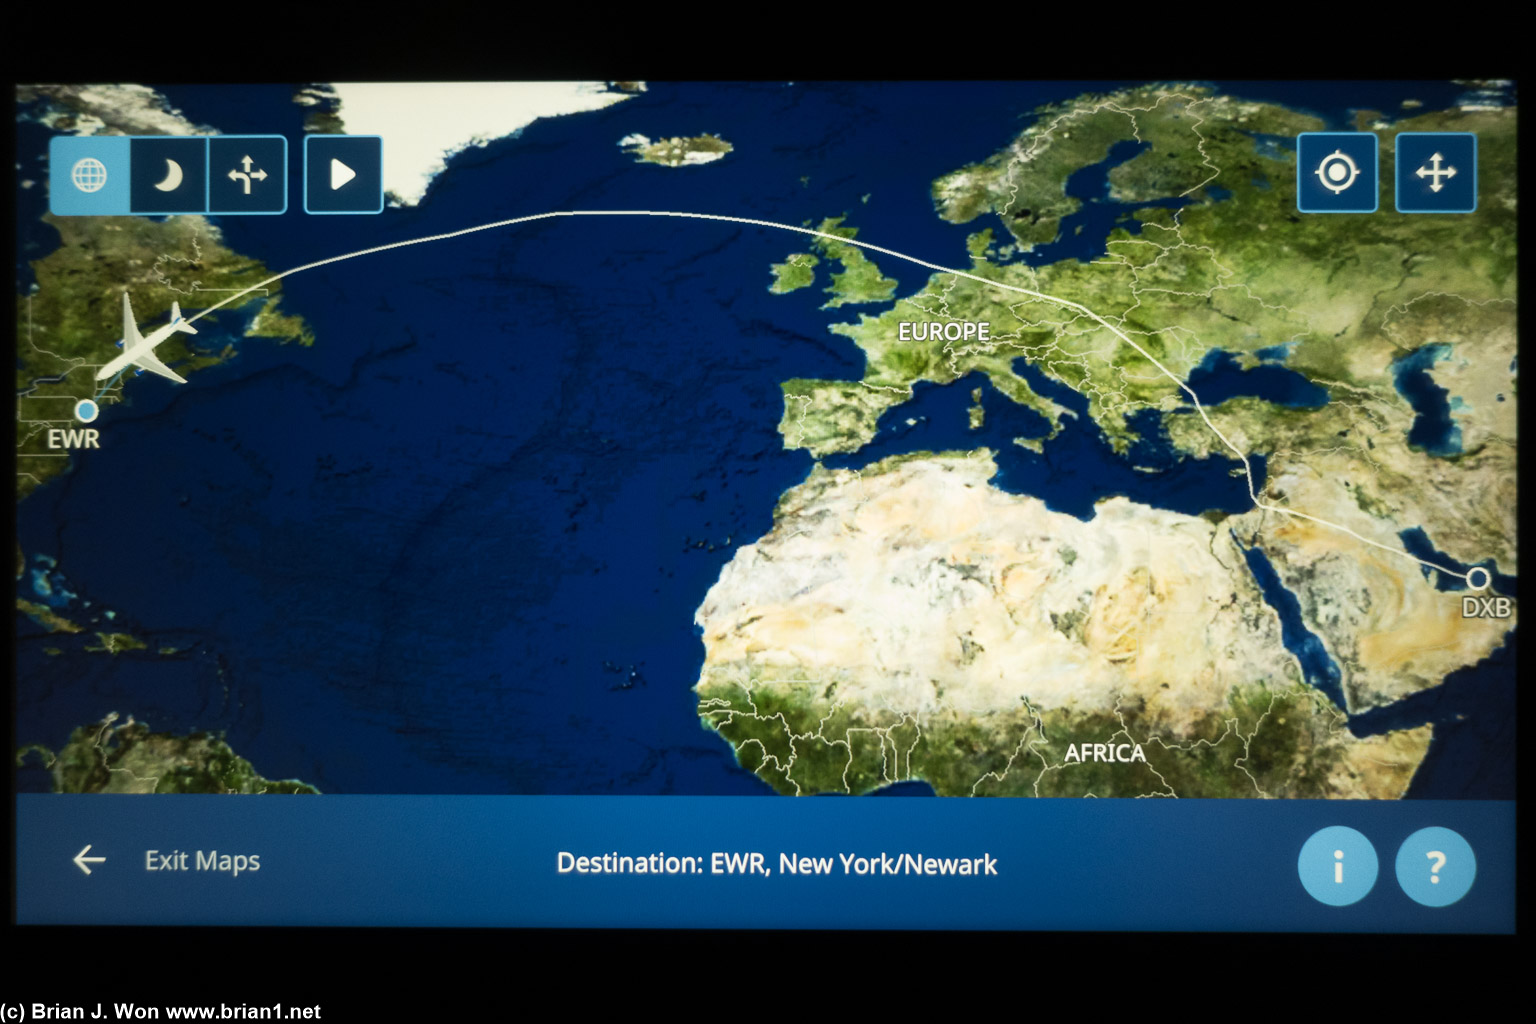 Almost done wiht the 6861 mile (great circle route) flight-- 7,213 miles actual.